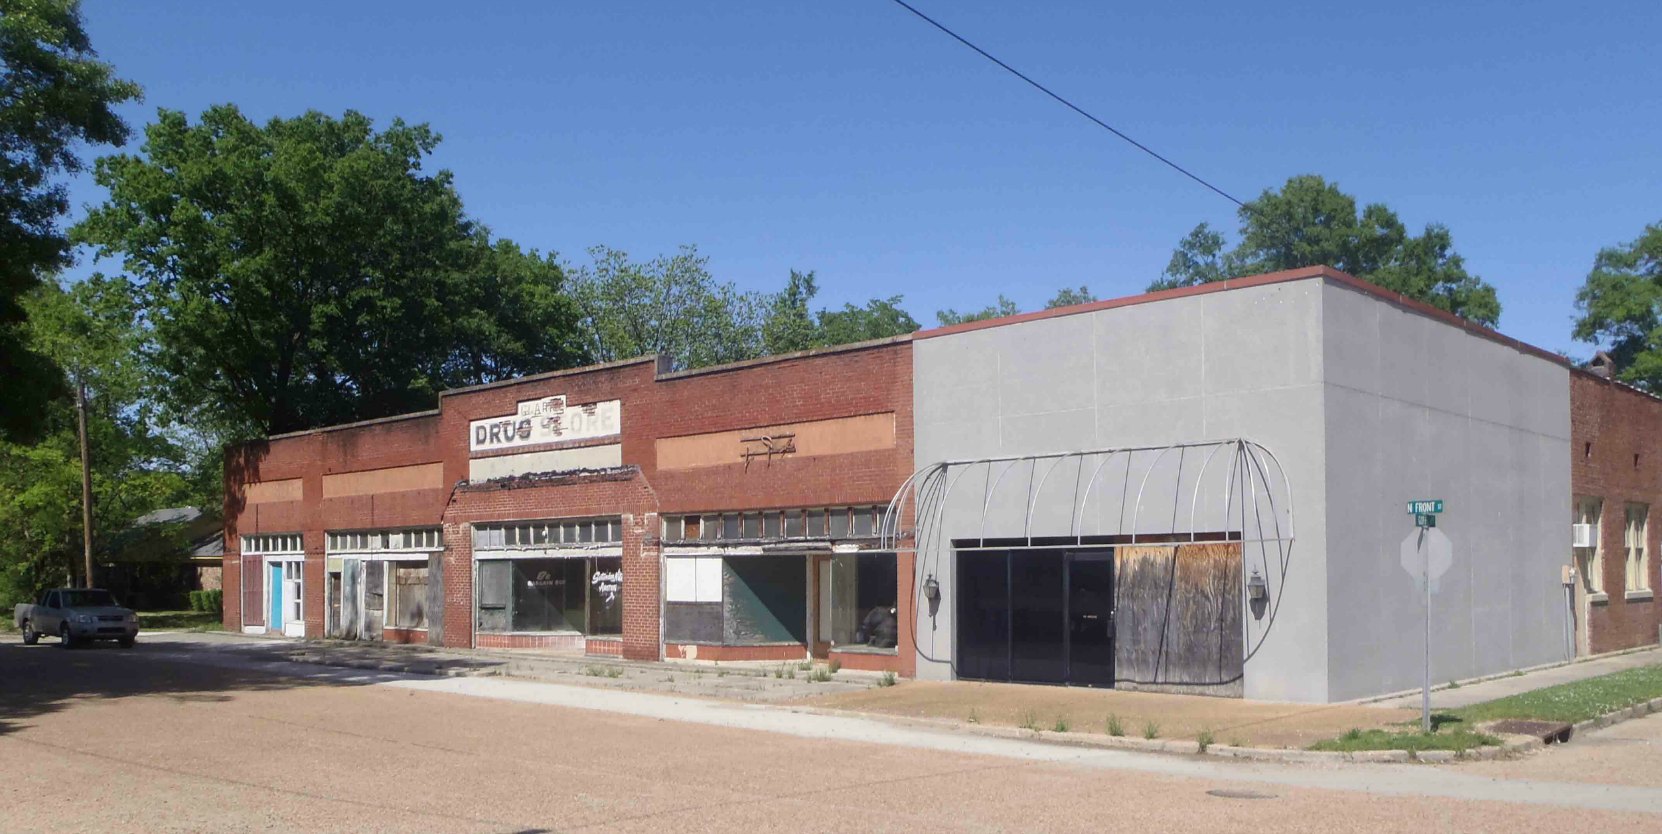 Downtown buildings in Merigold, Mississippi. This was a drug store but it is now vacant.